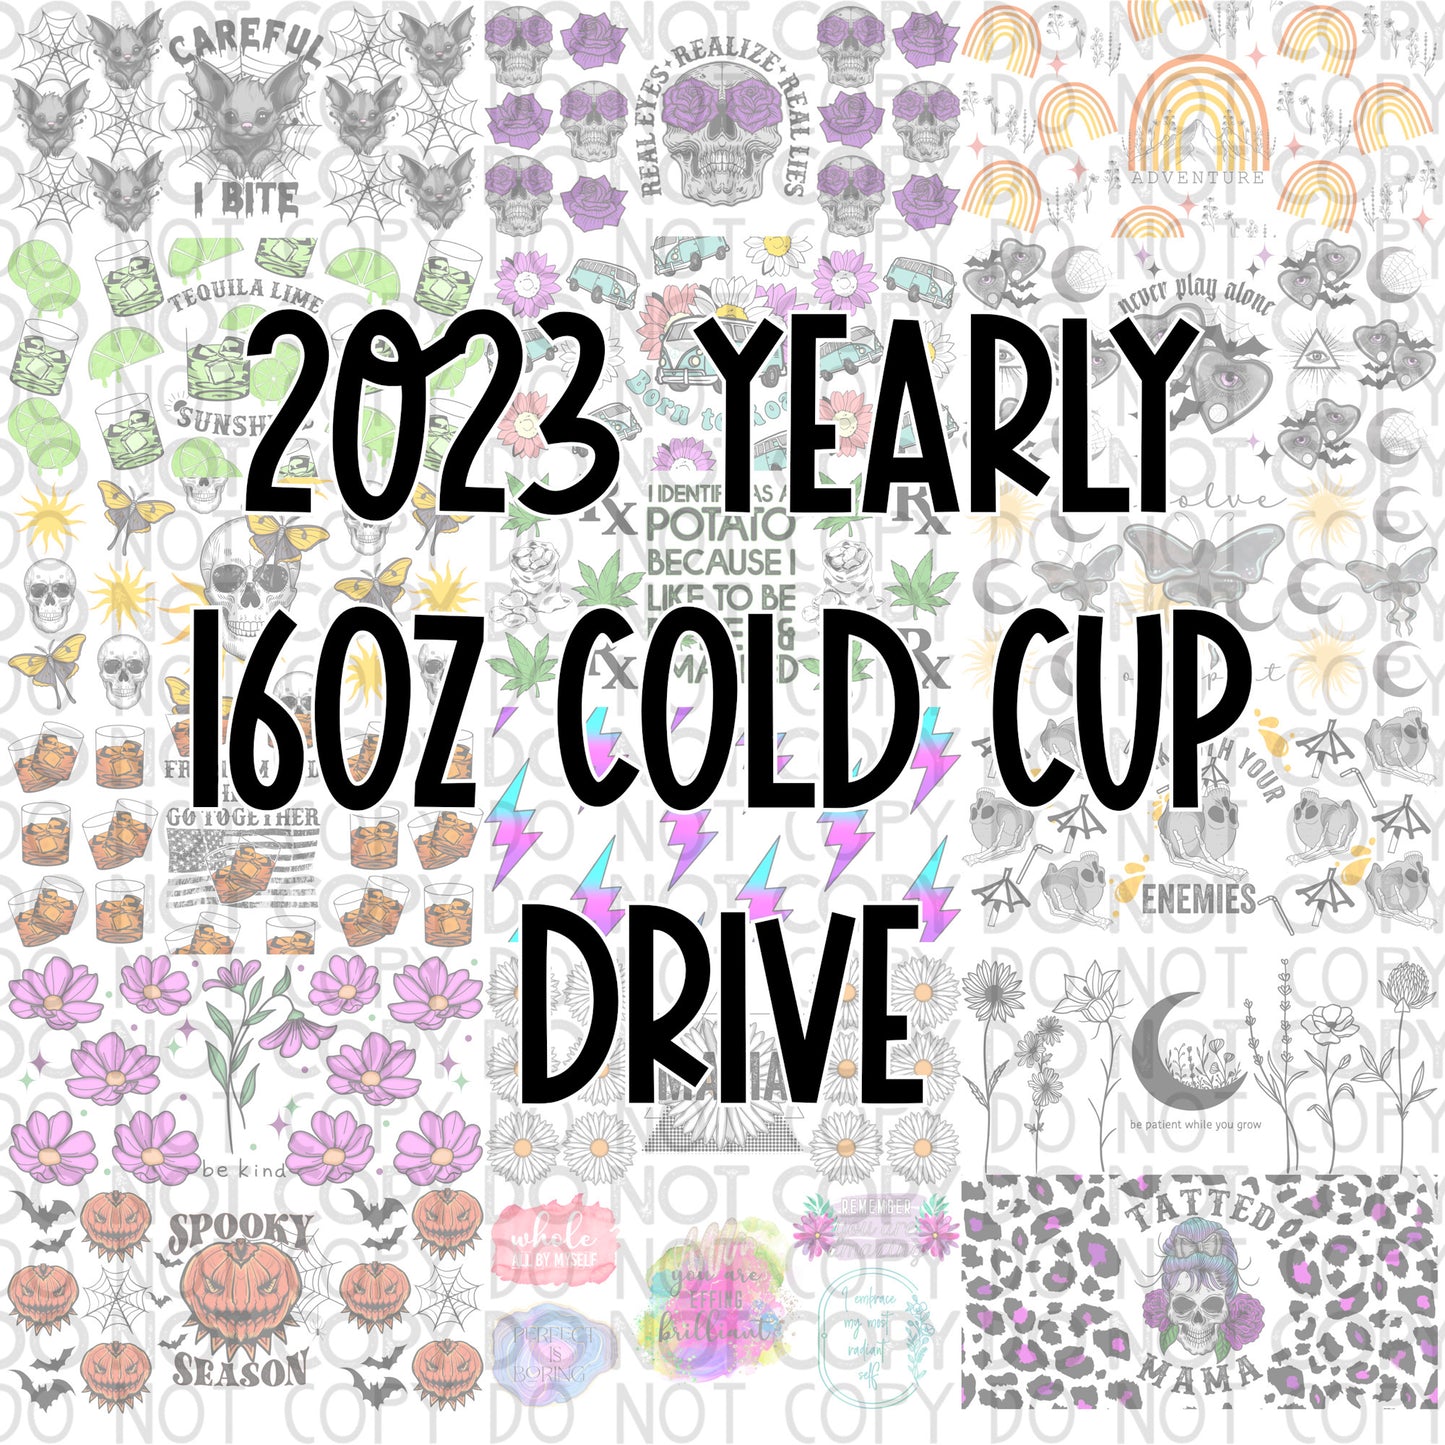 2023 yearly 16oz cold cup tumbler Drive